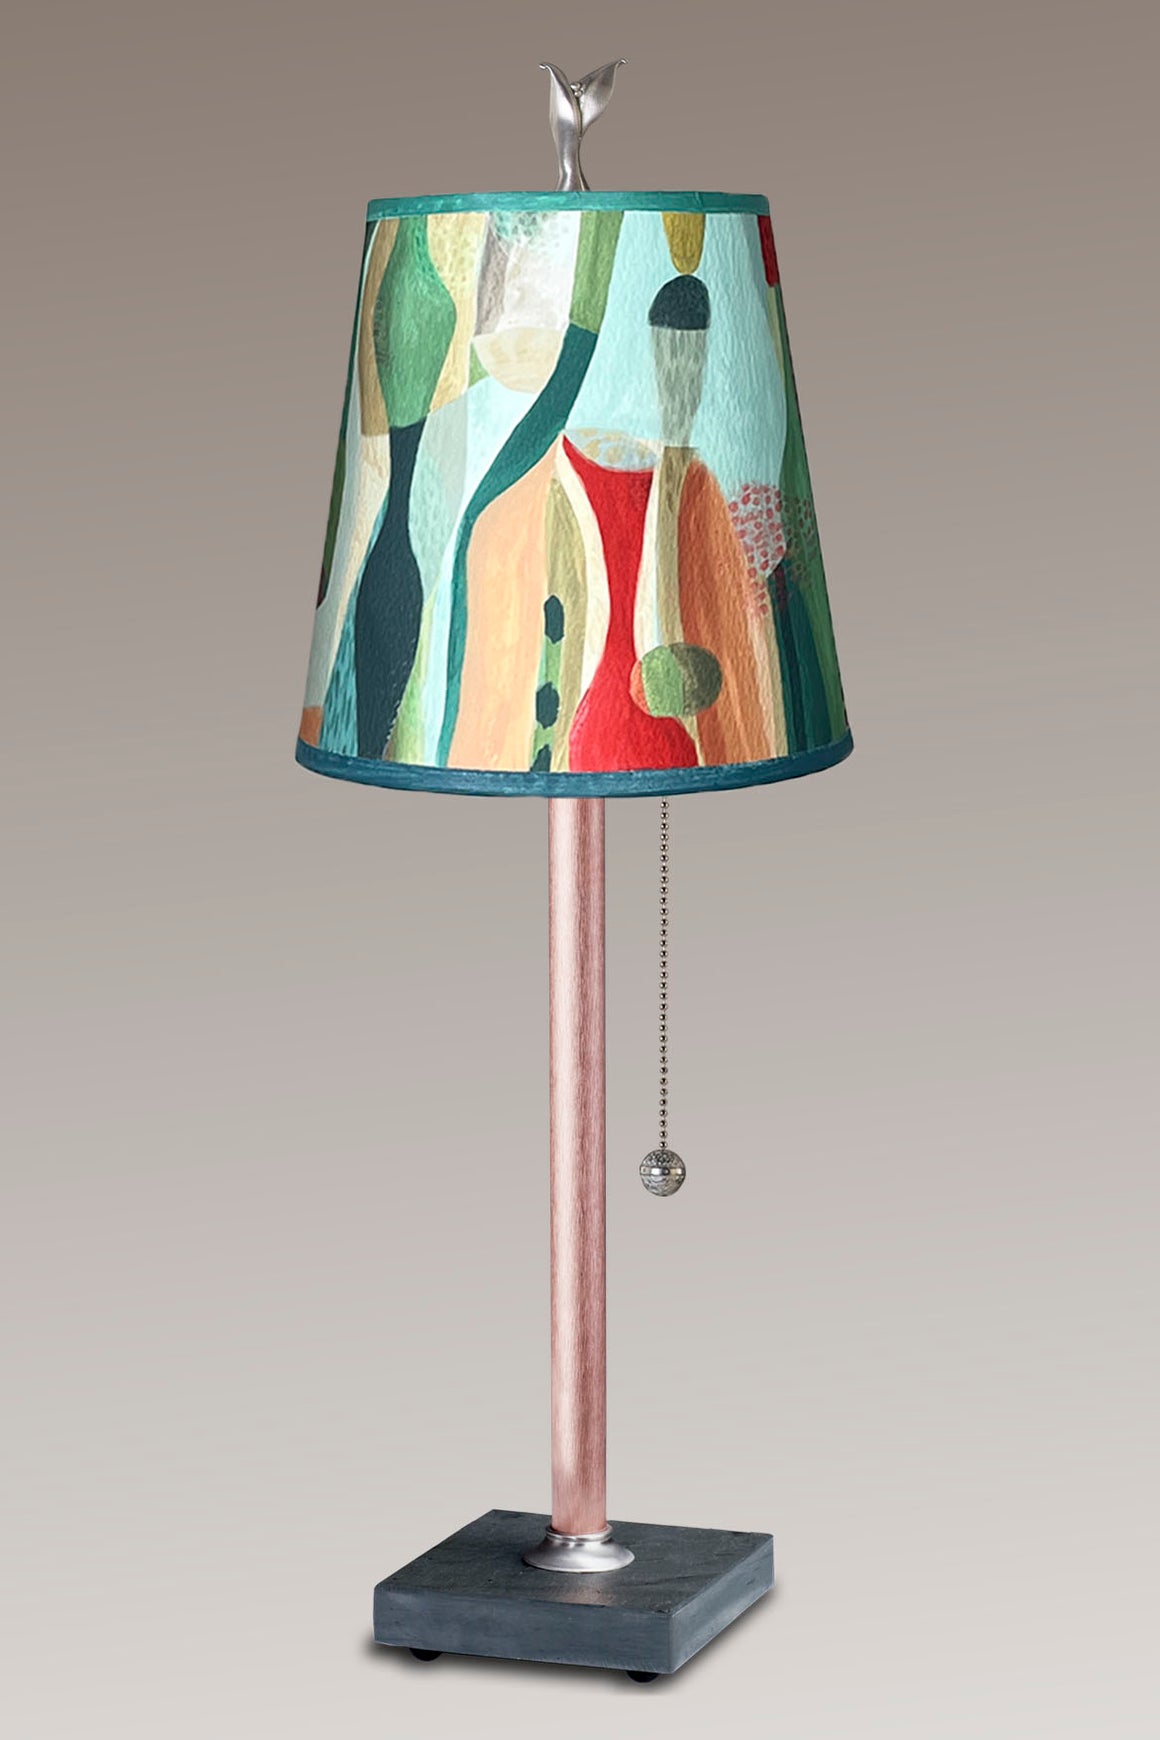 Copper Table Lamp with Small Drum Shade in Riviera in Poppy